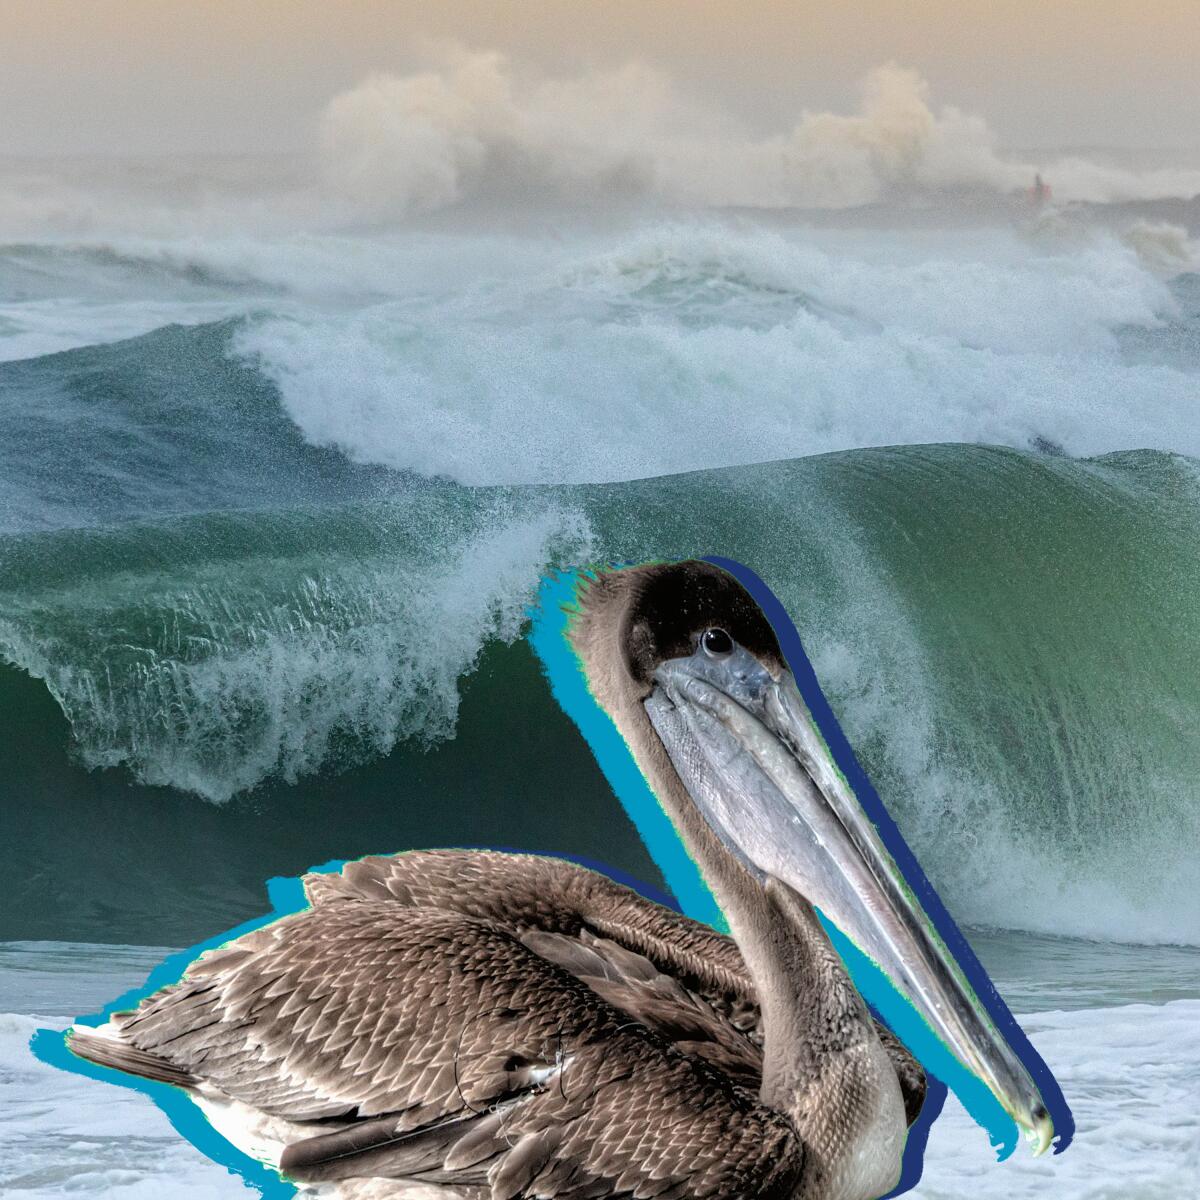 Photo illustration of a pelican in front of a crashing ocean wave.